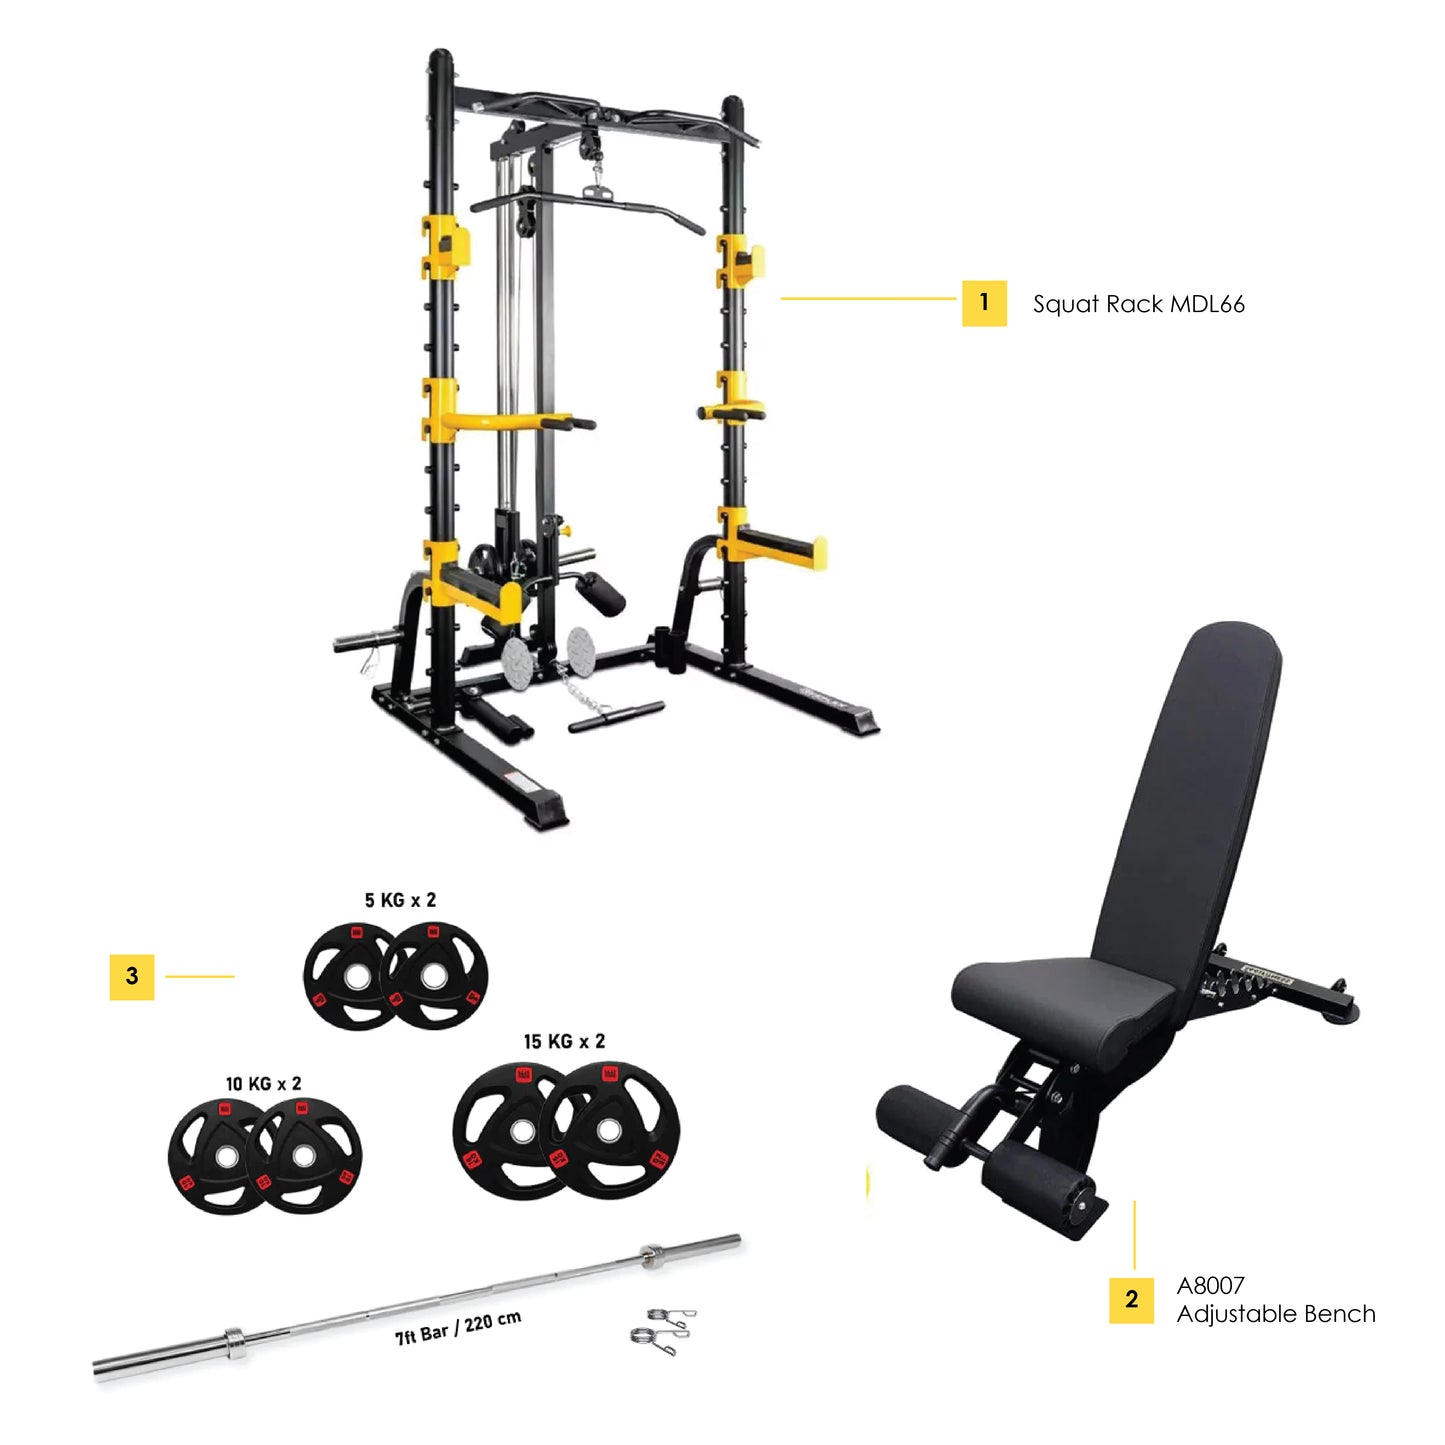 Combo Offer Squat Rack MDL66 + 7 ft Bar and 80 Kg Weight Plate Set with Adjustable Bench A8007